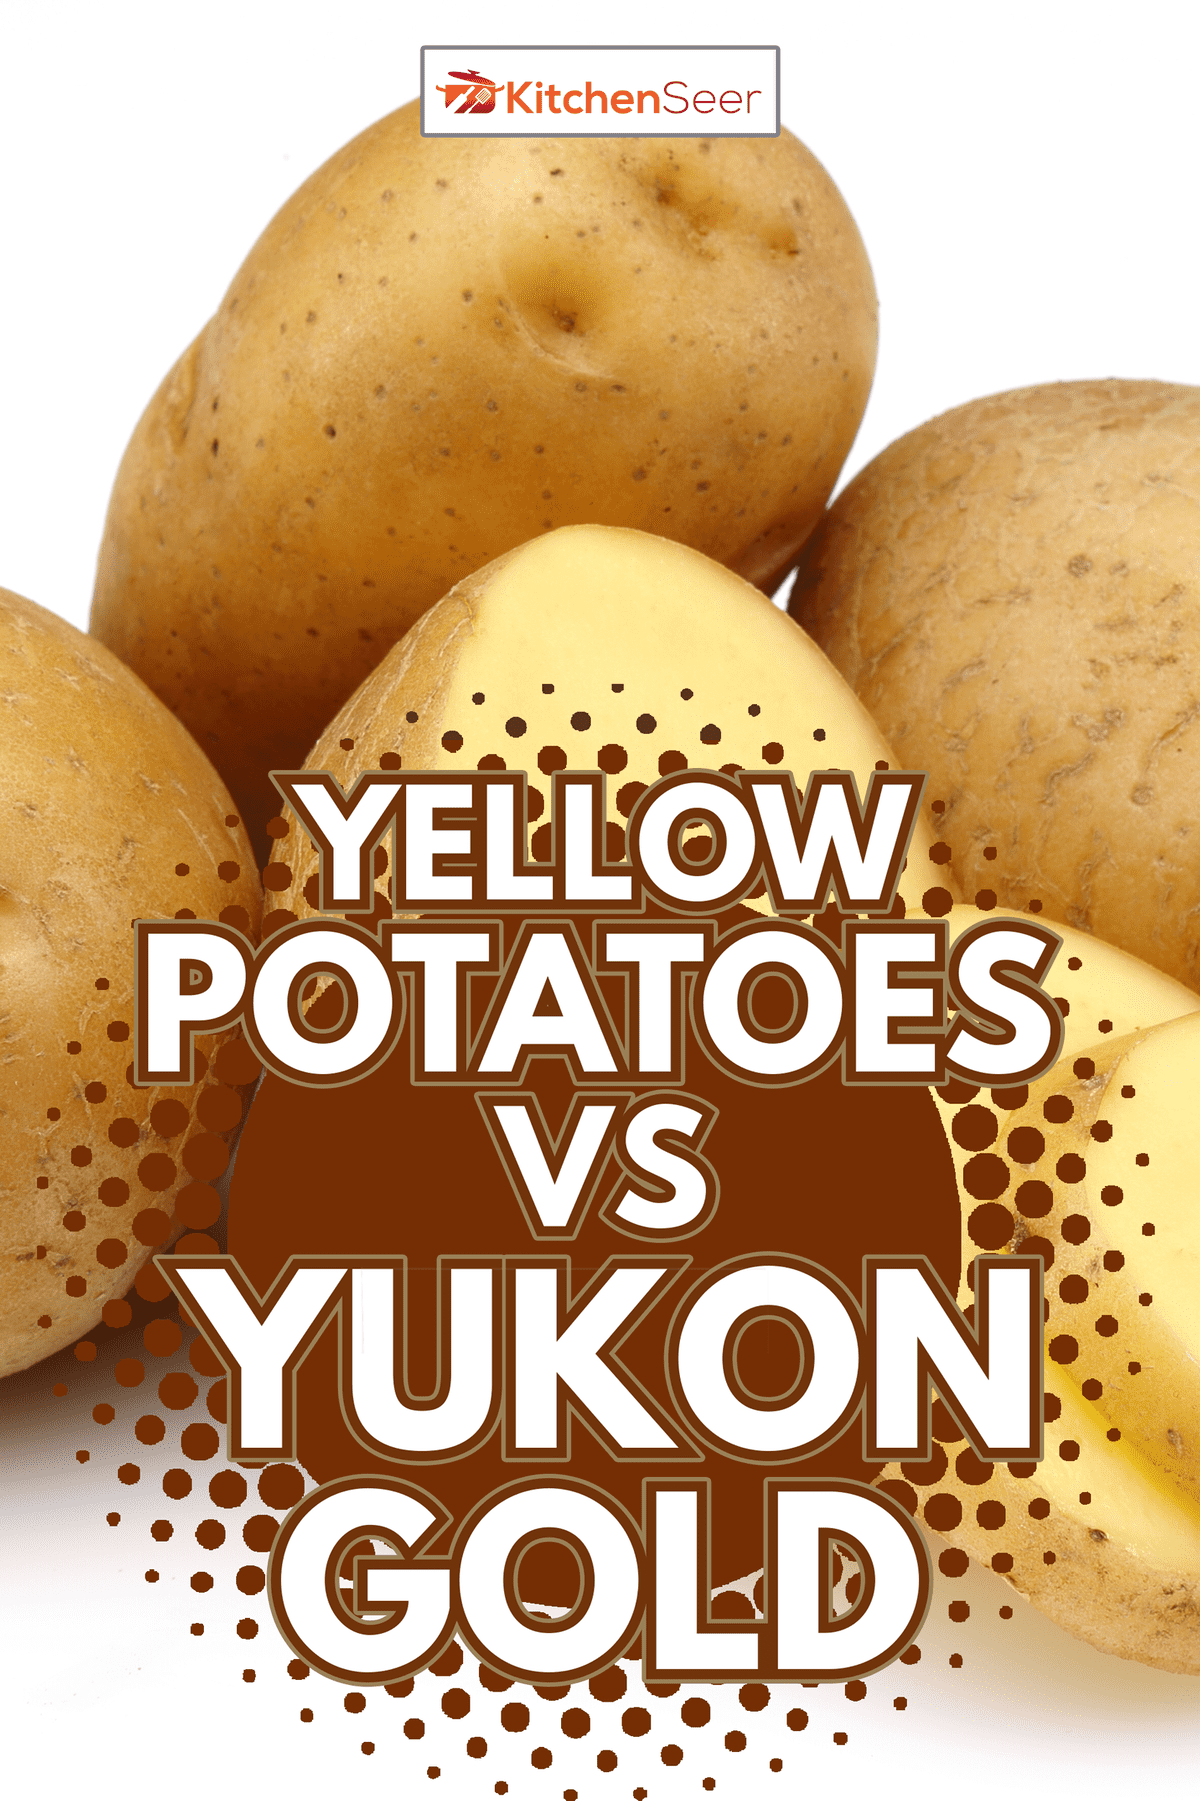 raw potatoes and slices isolated on white background - Yellow Potatoes Vs Yukon Gold: What's The Difference